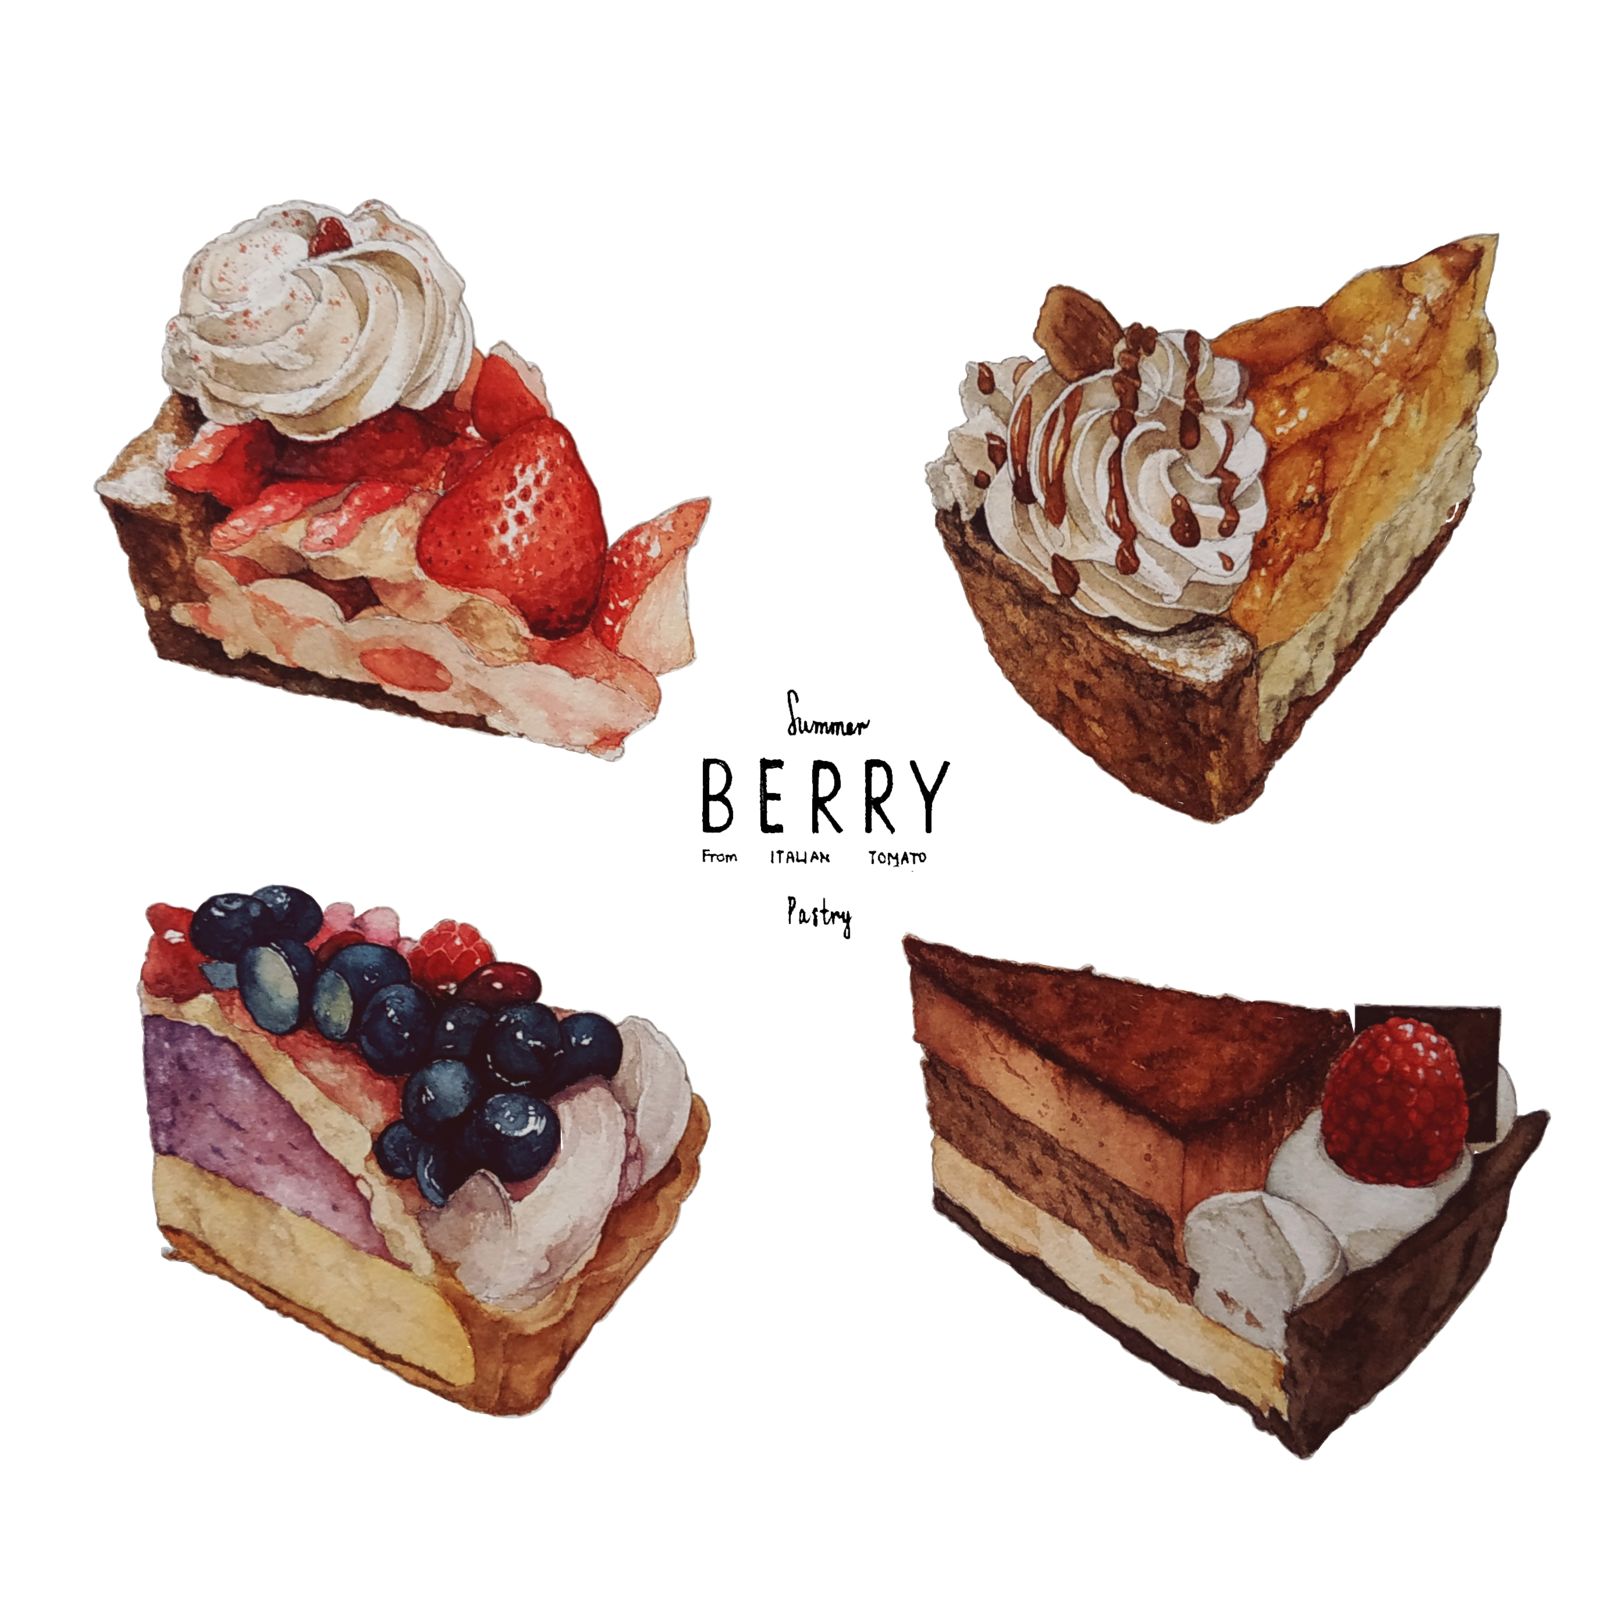 Summer Berry Pastry